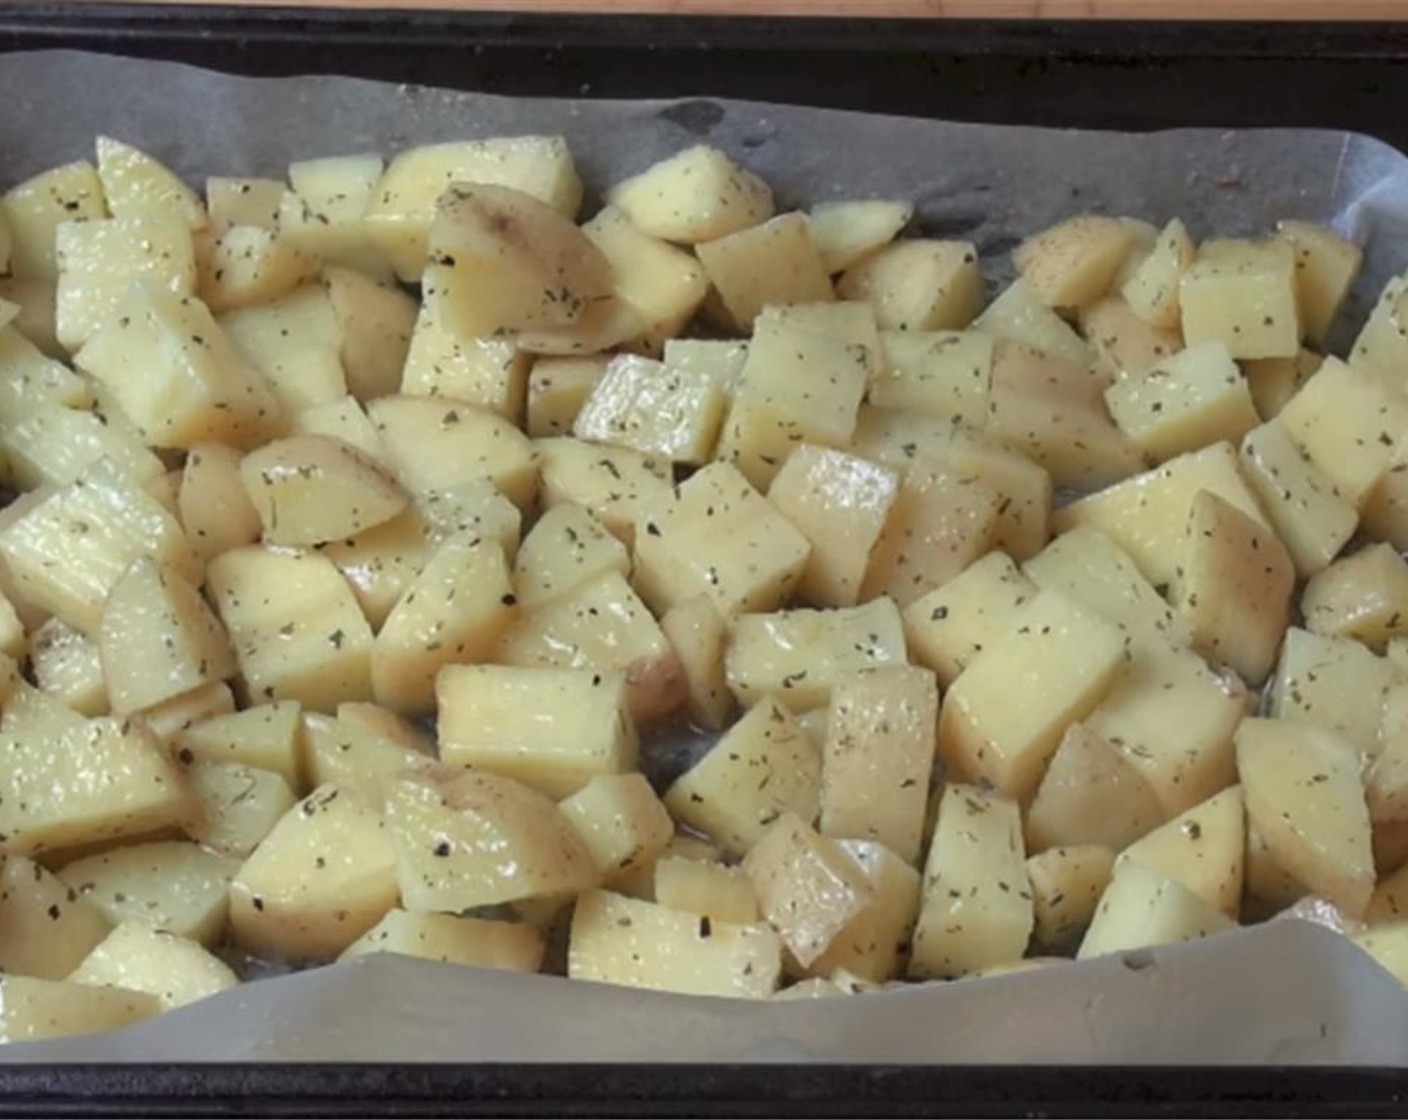 step 4 In a roasting pan, line with non-stick baking paper and put the partially cooked potatoes on the pan. Drizzle the mixed seasoning over them and mix well with a wooden spoon.